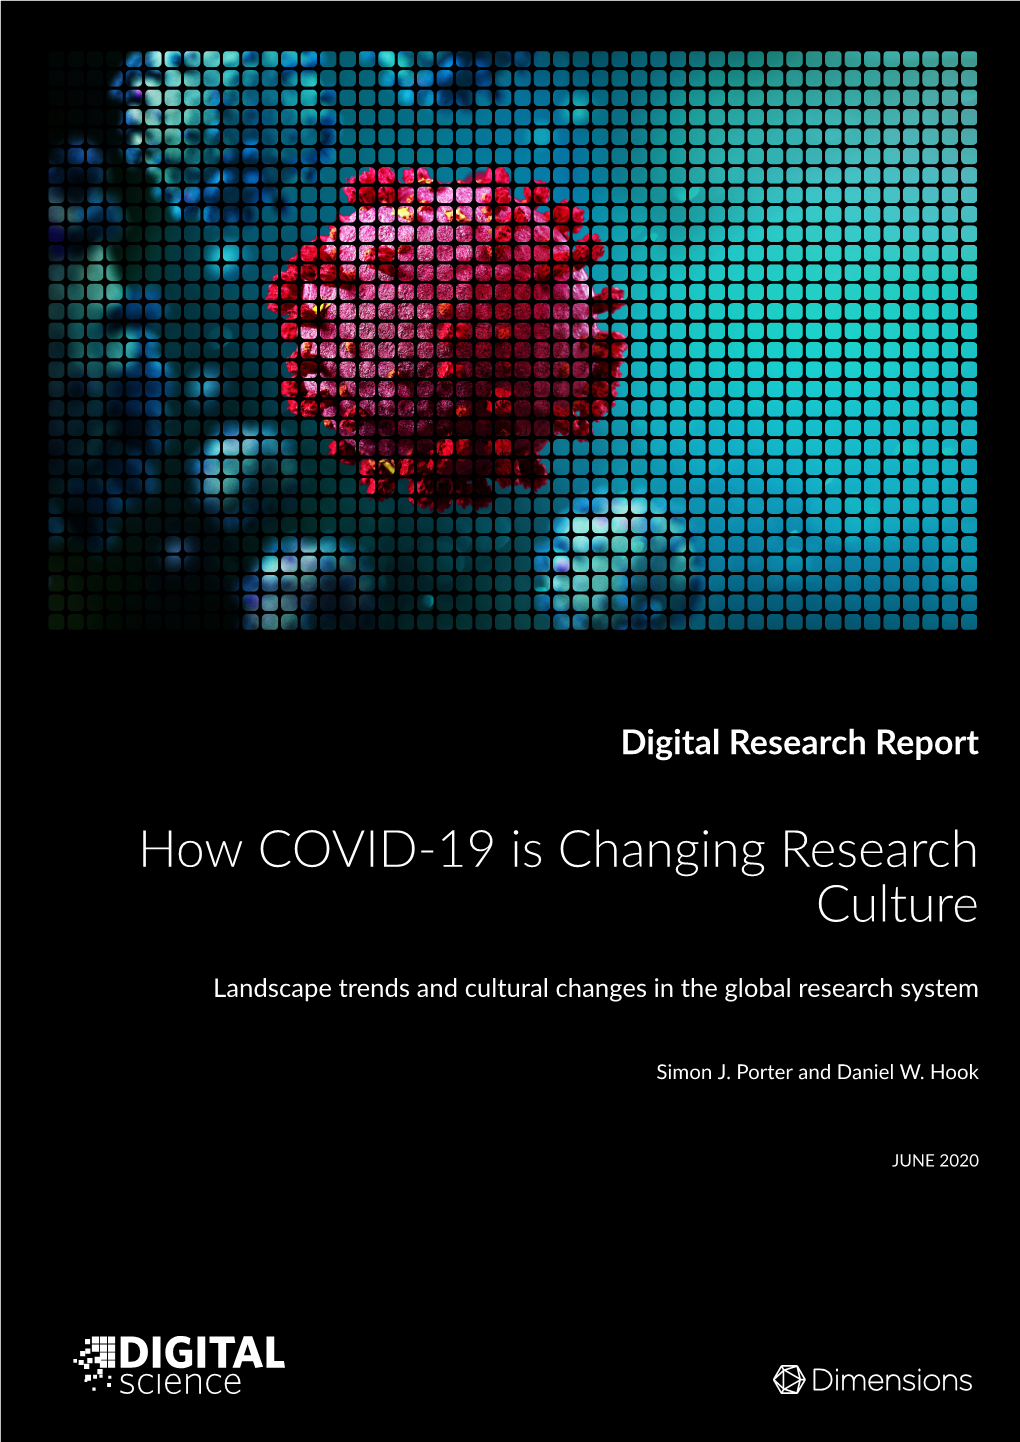 How COVID-19 Is Changing Research Culture